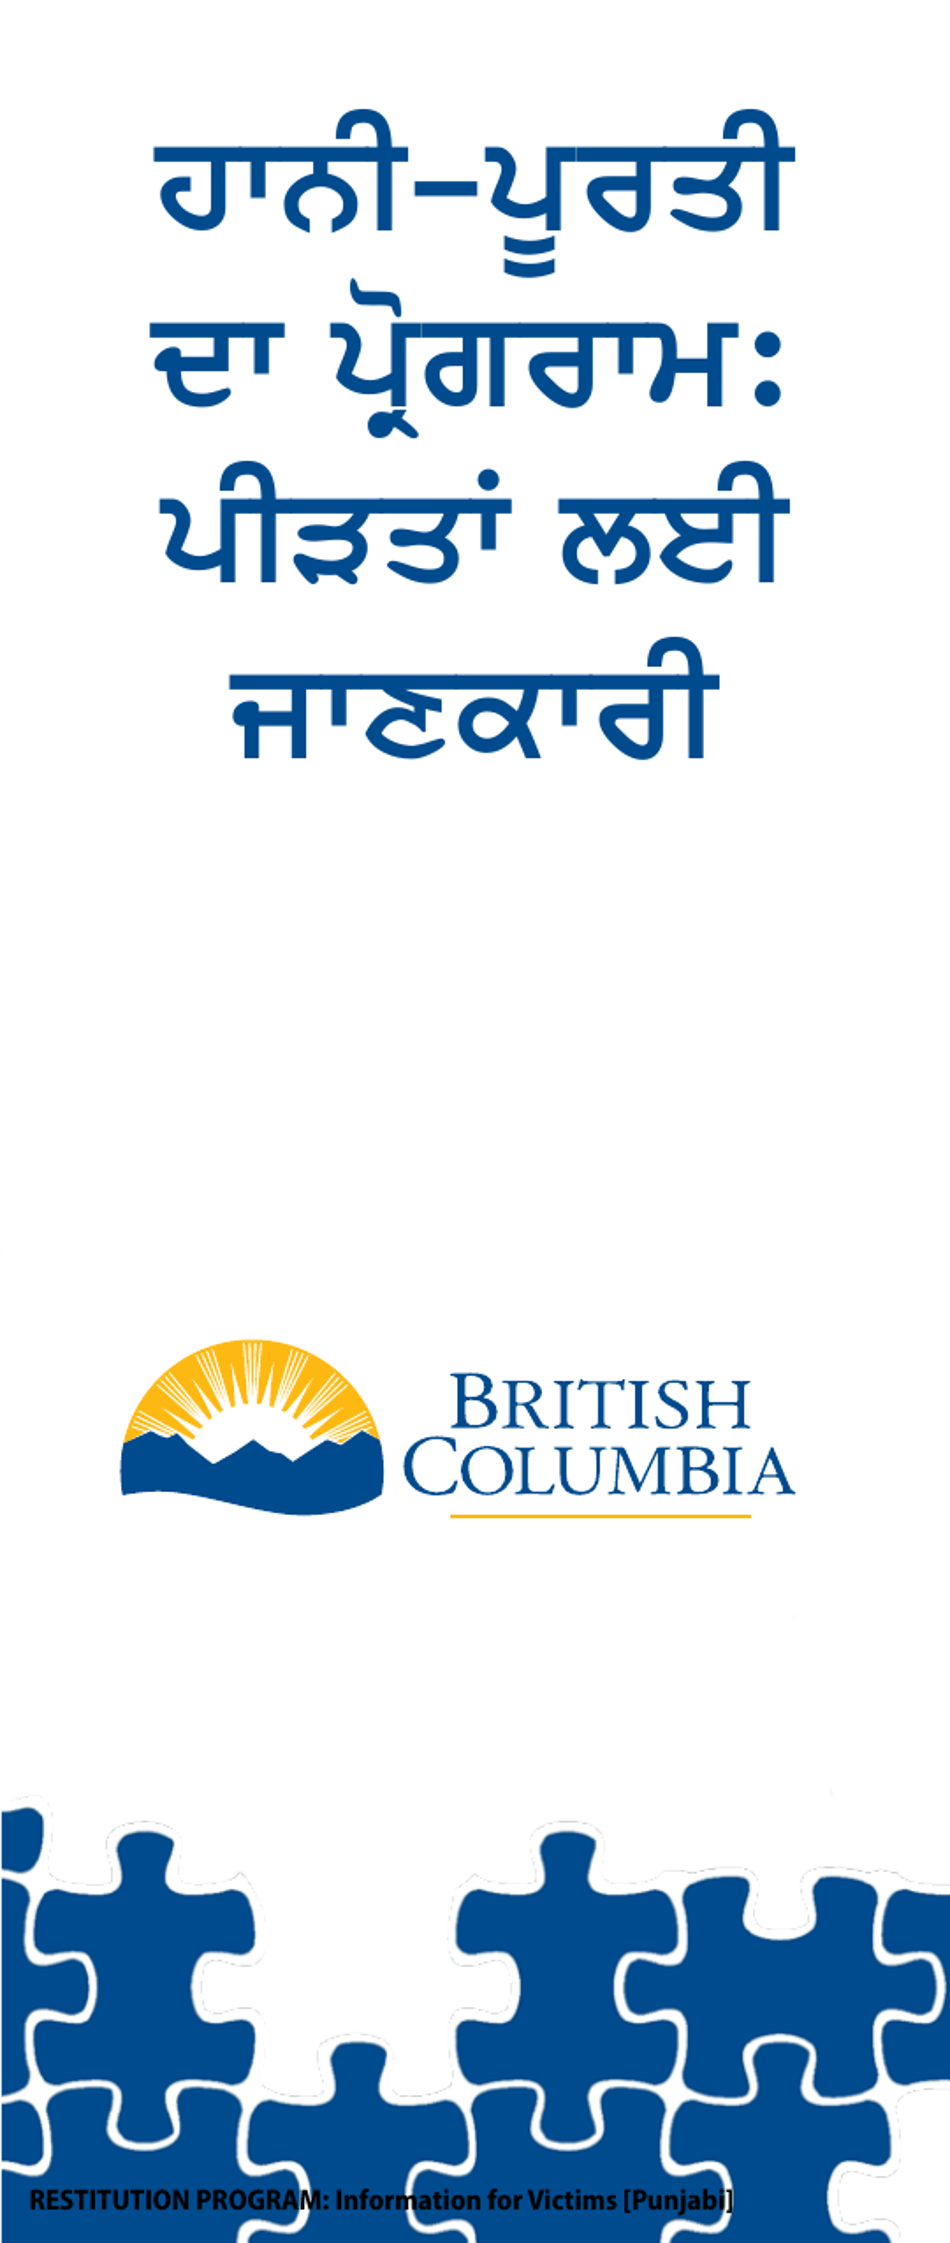 Restitution Program Application Form for Victims - British Columbia, Canada (English / Punjabi), Page 1